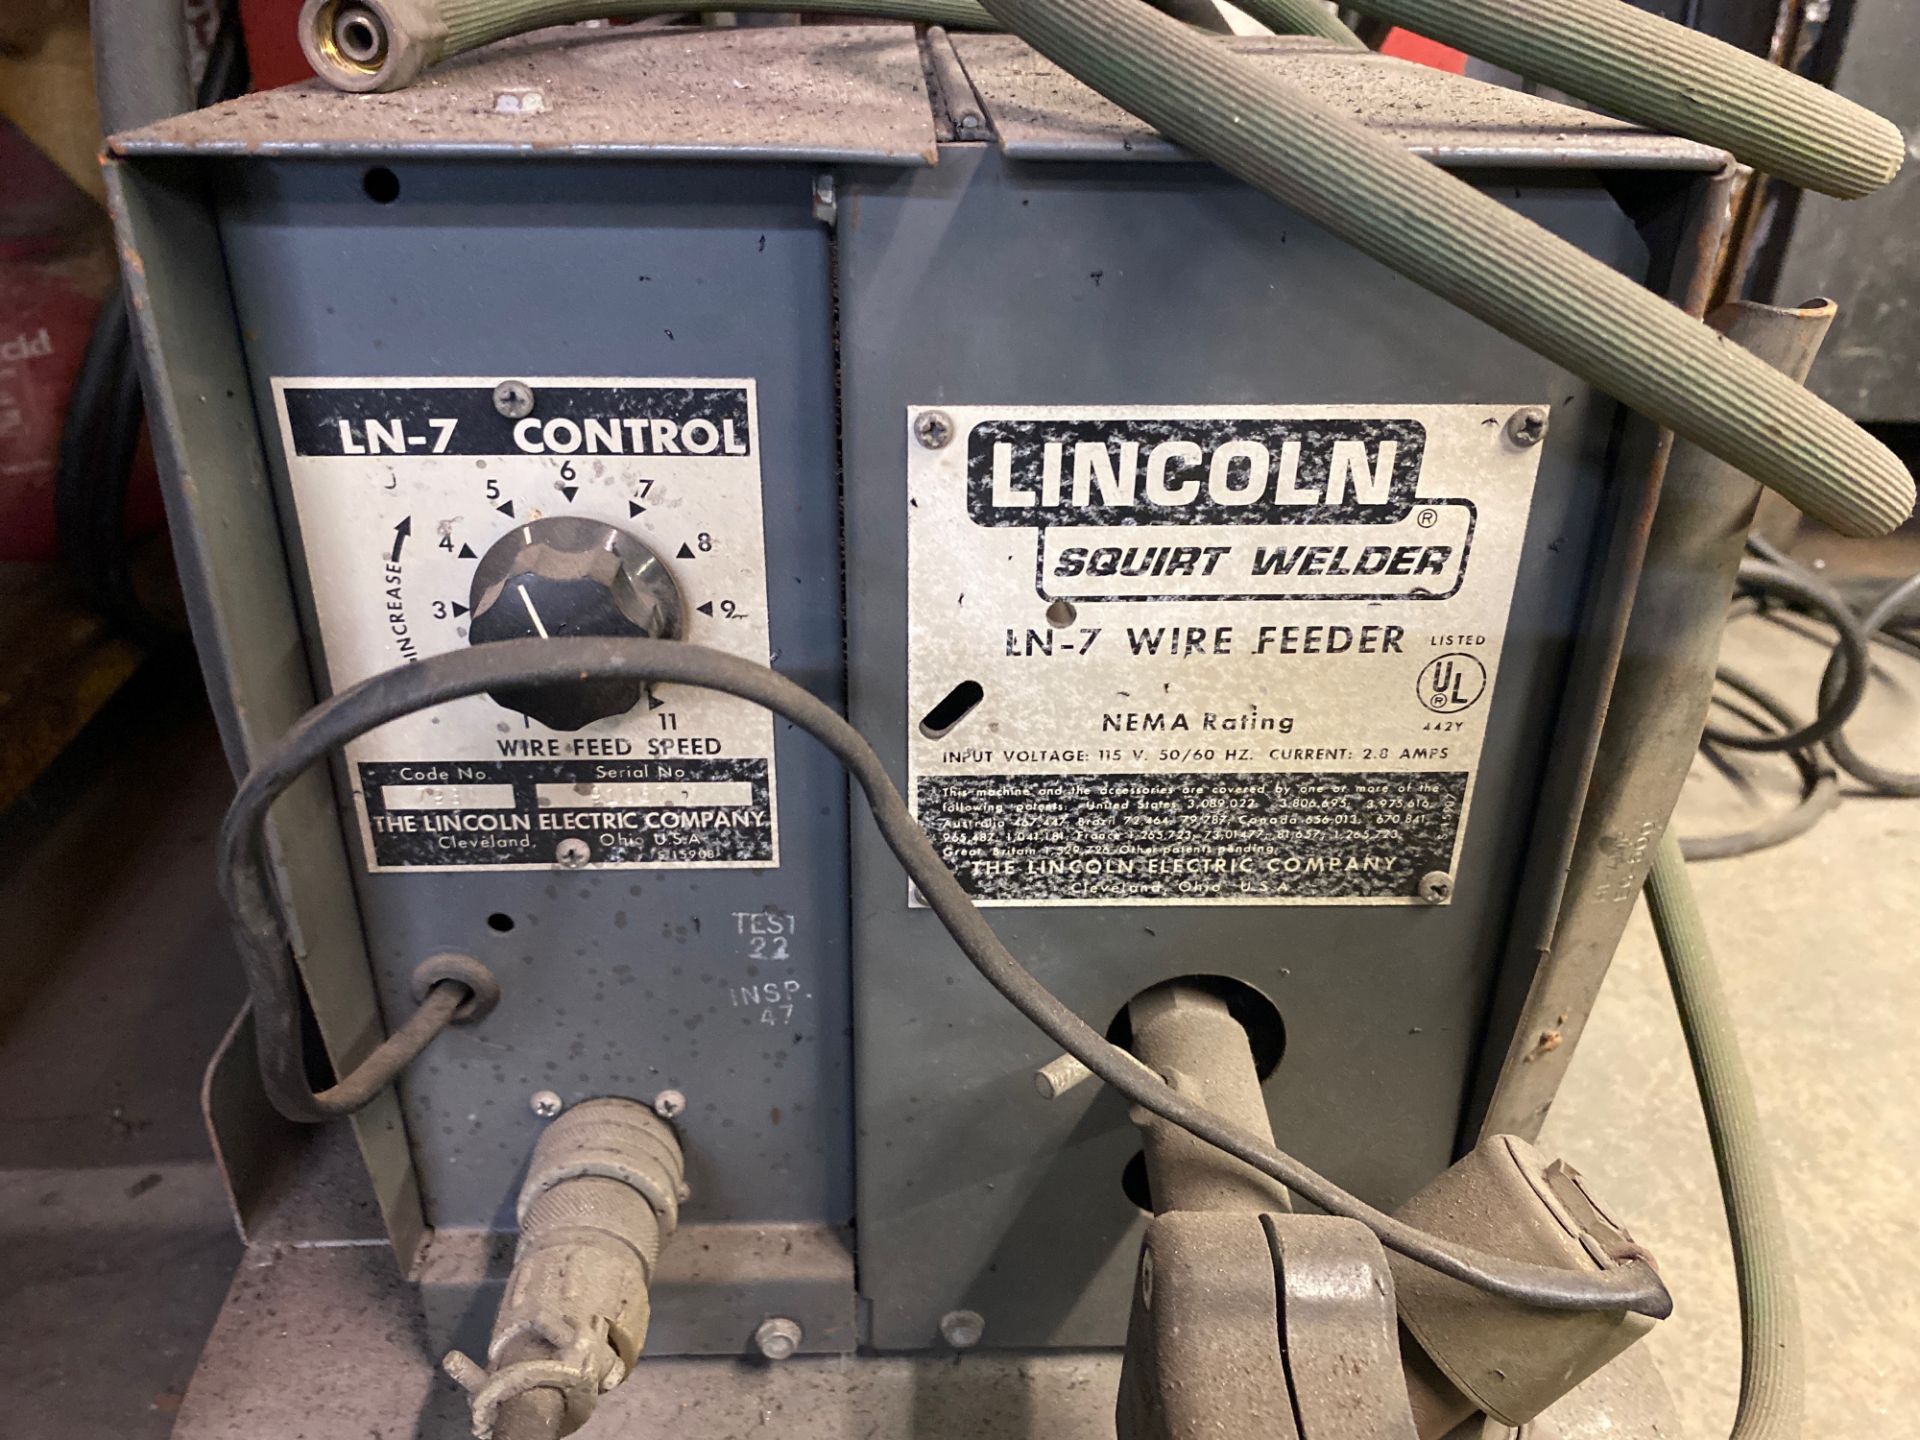 Lincoln Squirt Welder LN-7 Wire Feeder - Image 2 of 3